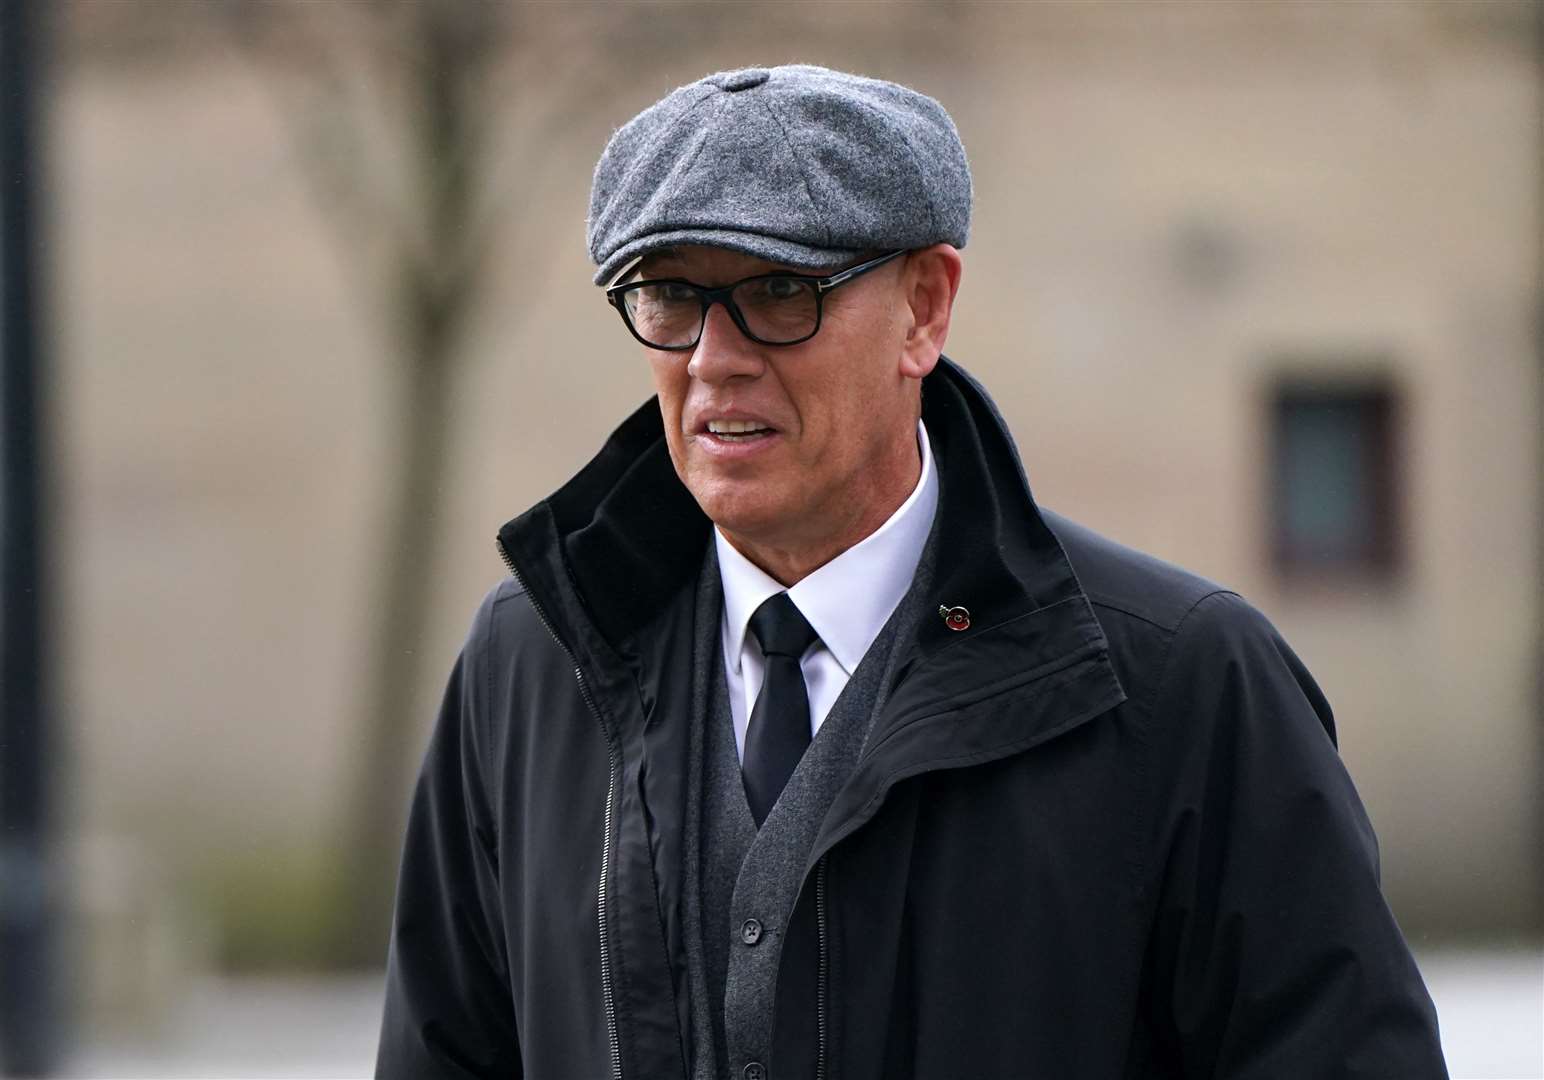 Former Rangers player Mark Hateley said Rangers are enjoying a ‘great period’ (Andrew Milligan/PA)